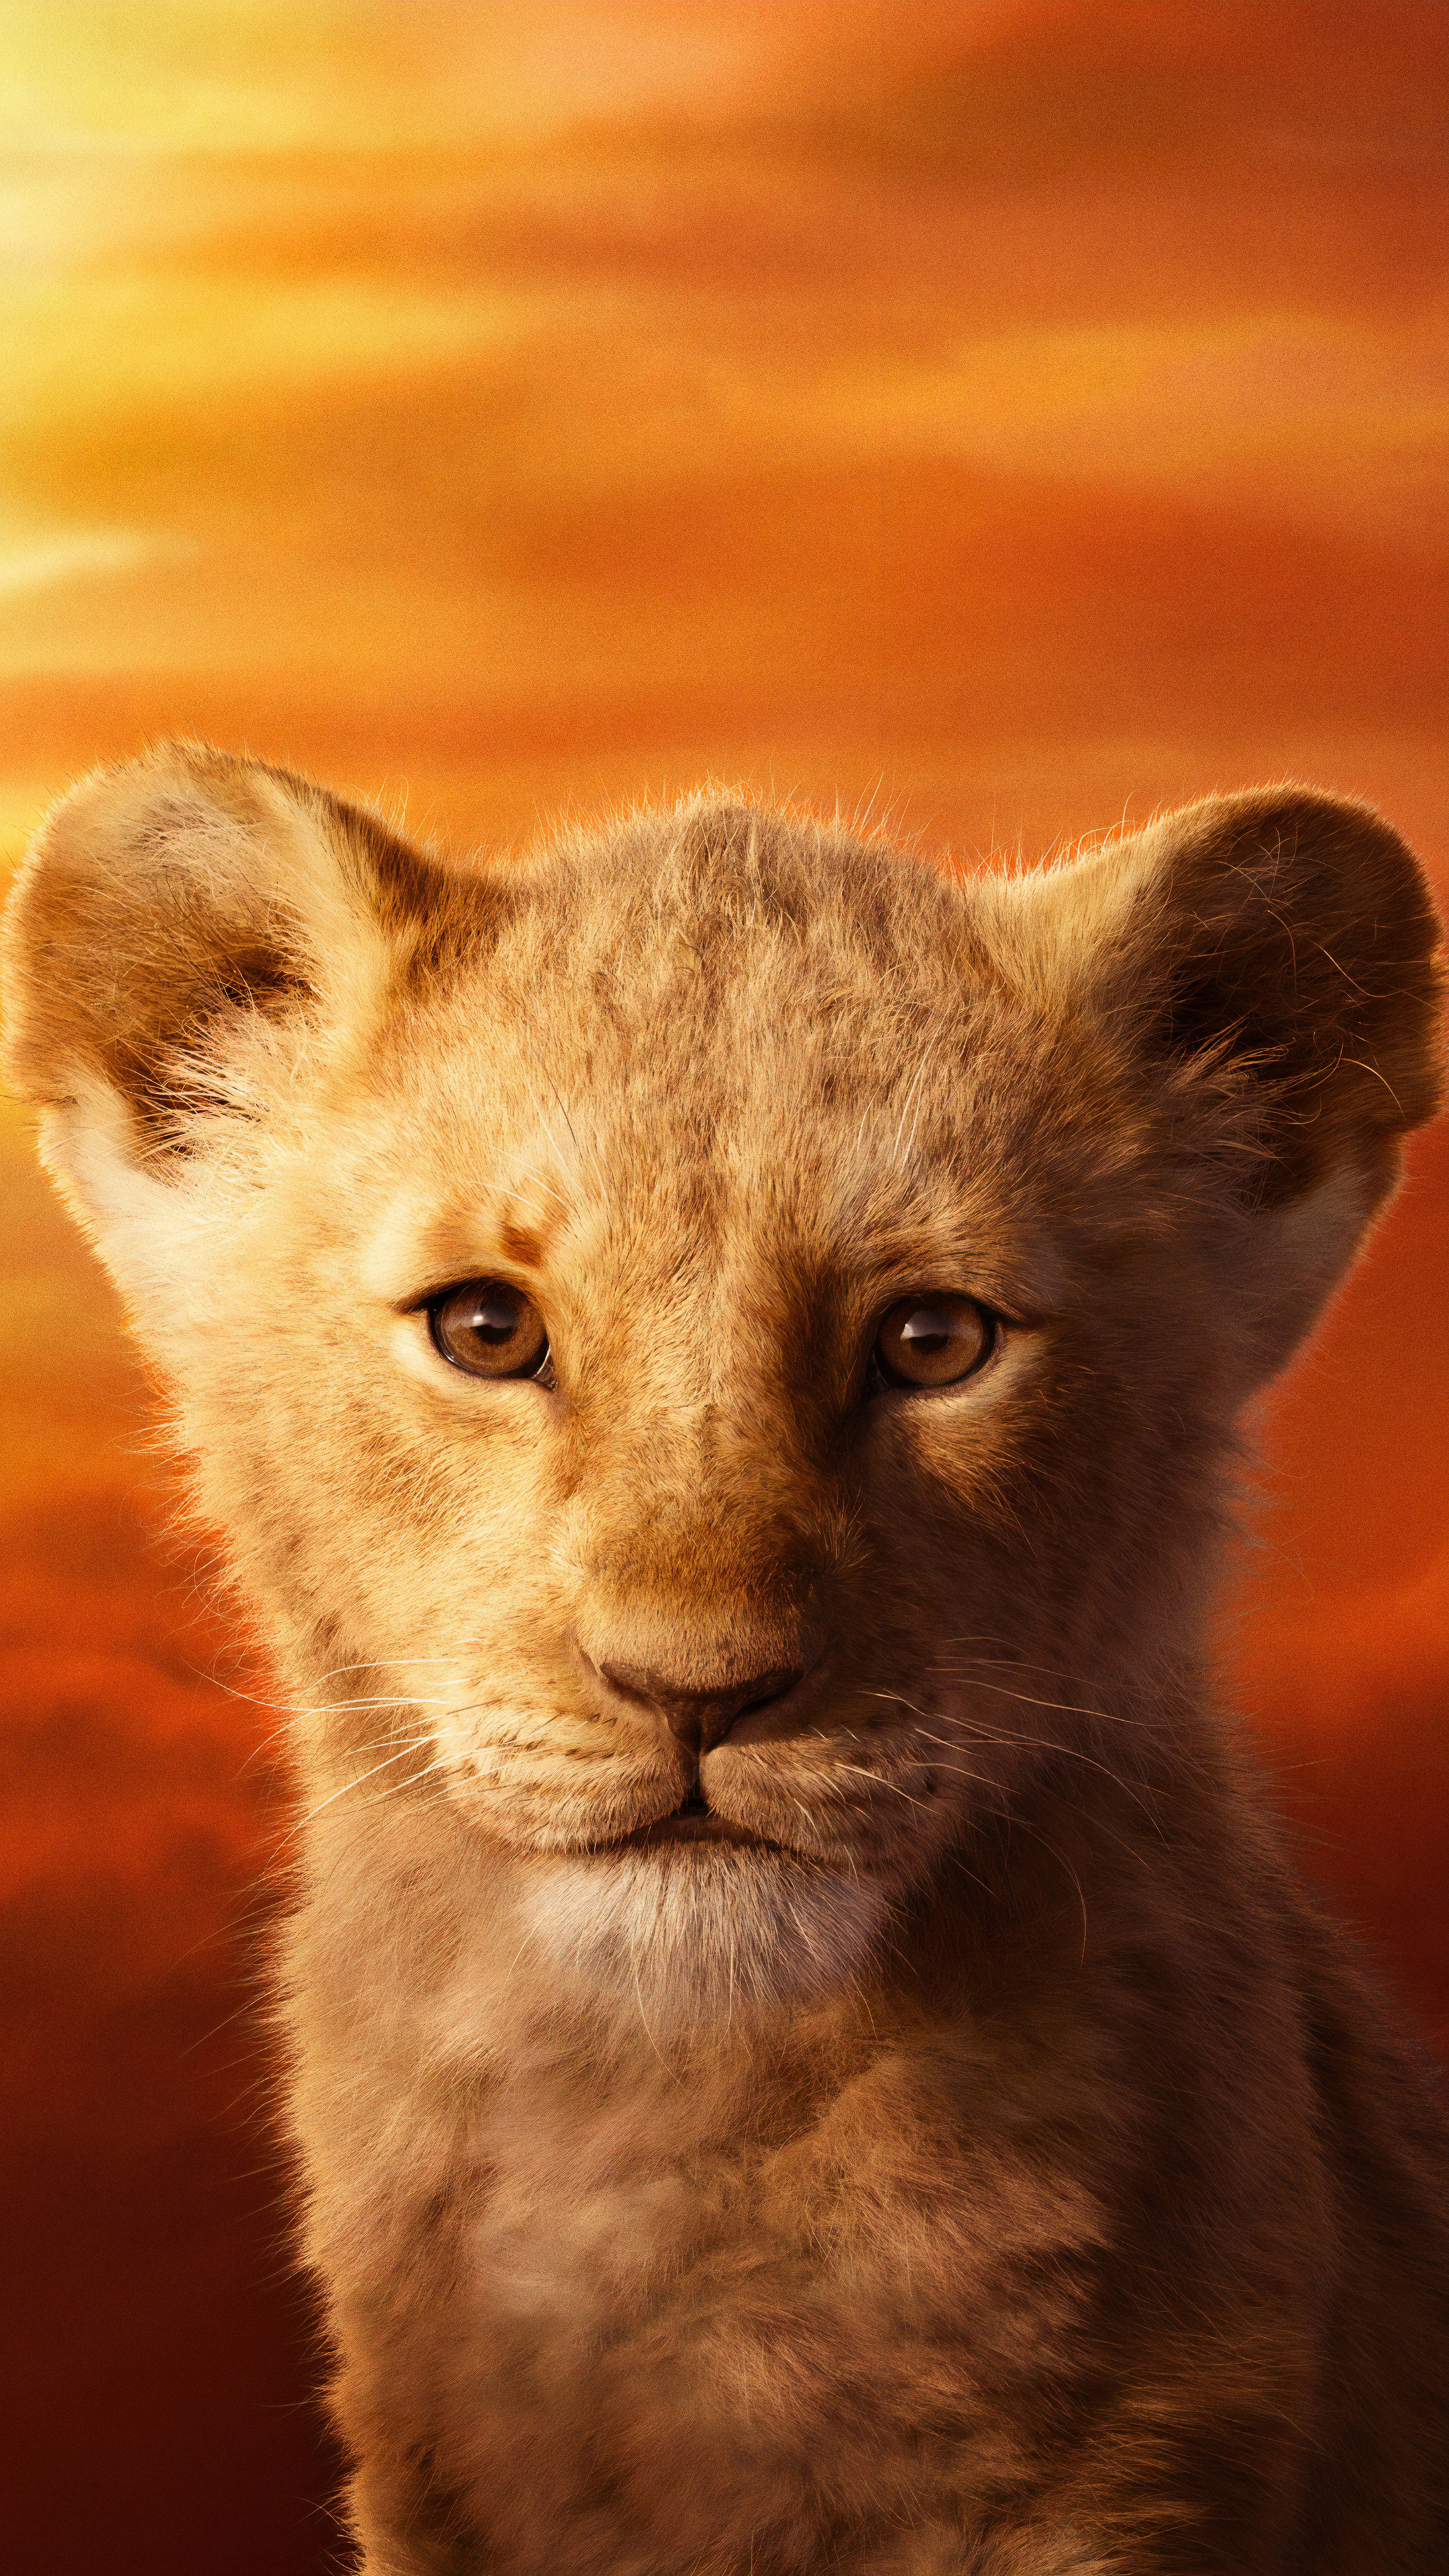 The Lion King, J. D. McCrary as Simba, Stunning 4K imagery, Iconic characters, 2160x3840 4K Handy